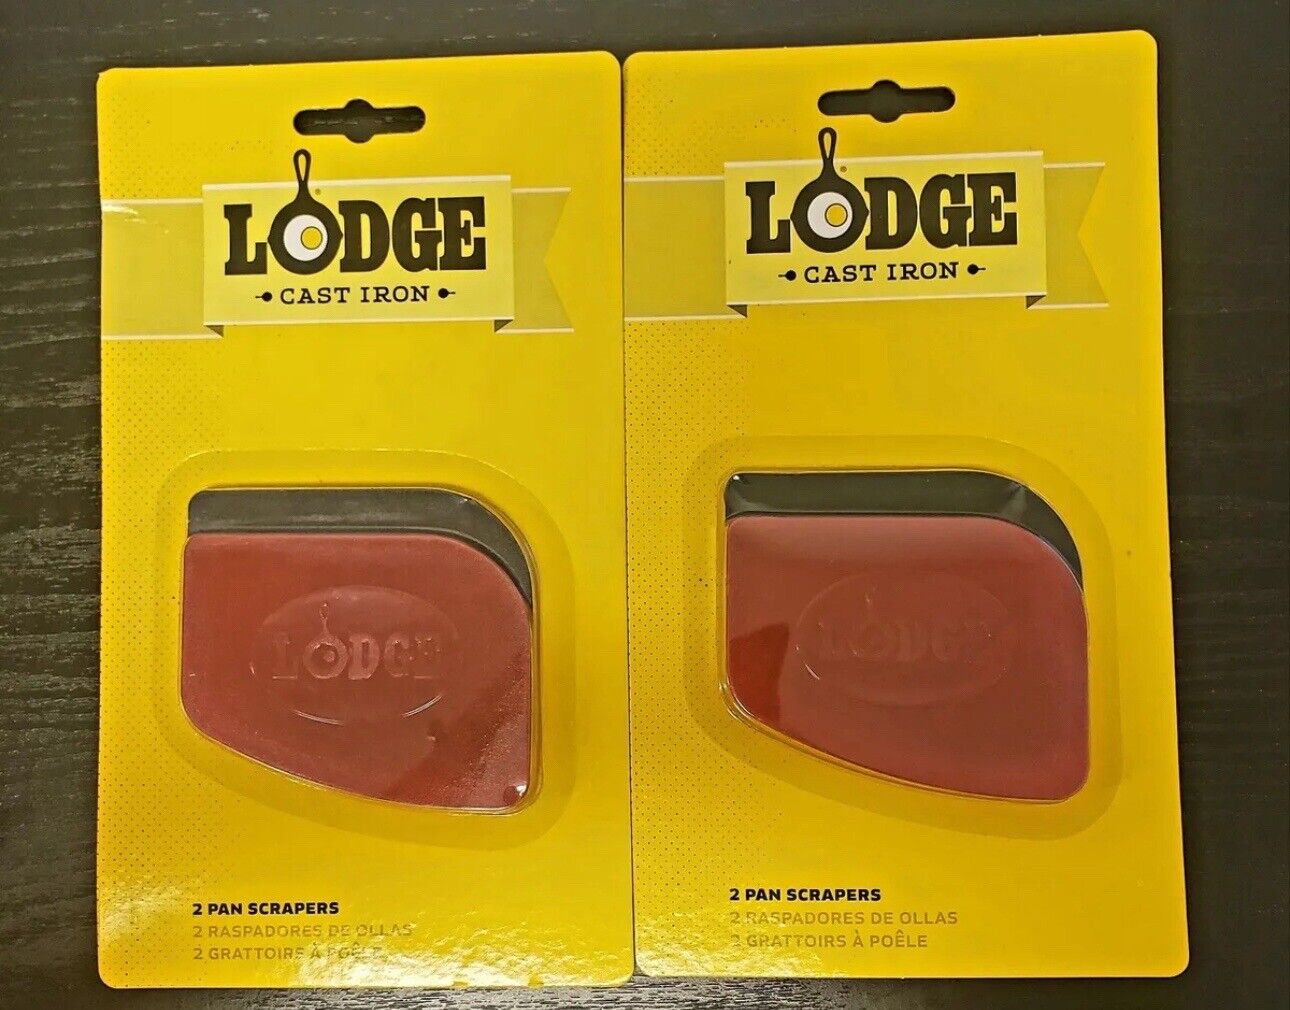 Lodge Durable Polycarbonate Pan Scraper, set of 2 Black and 2 Red